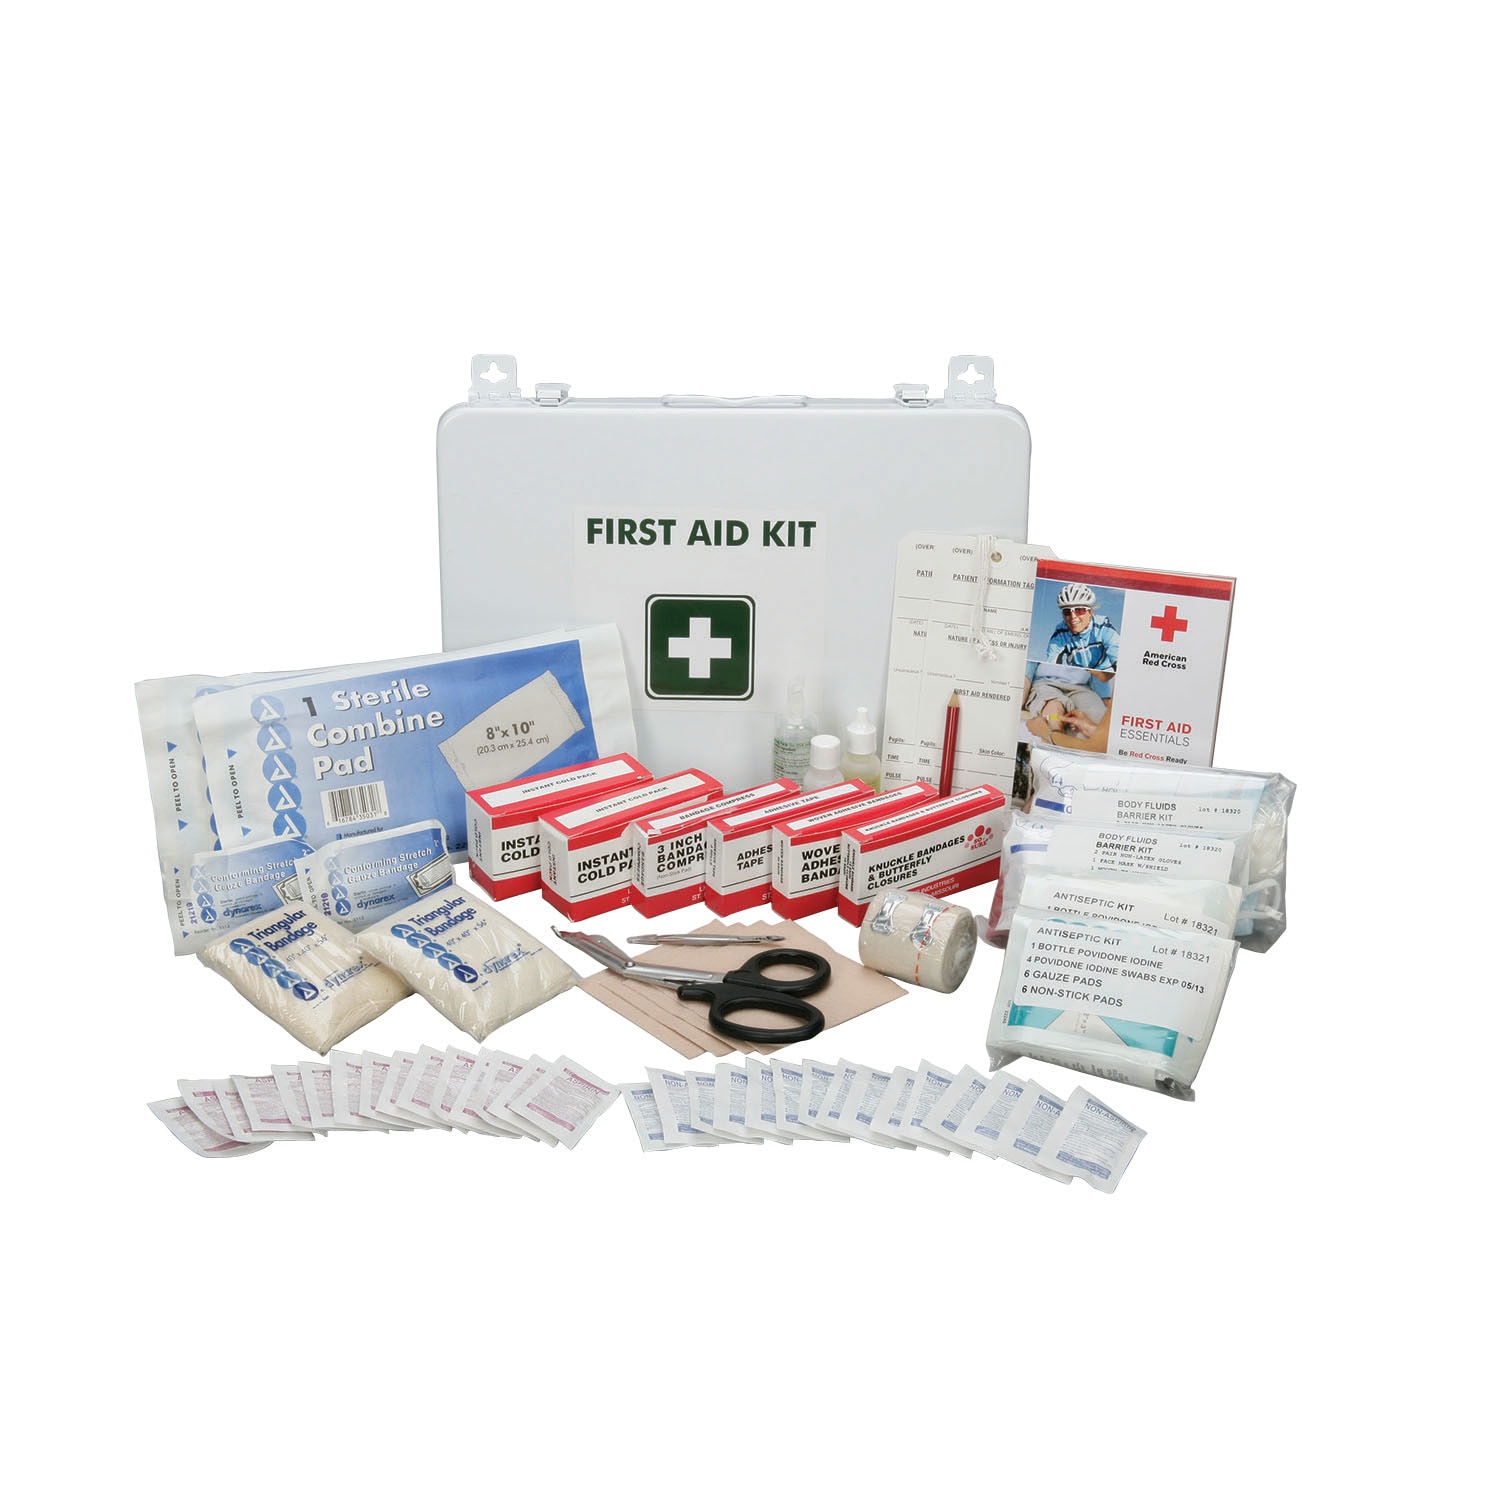 Kit, First Aid, Industrial/Construction Use, Metal Box, 10" x 14-1/2" x 2-3/4"